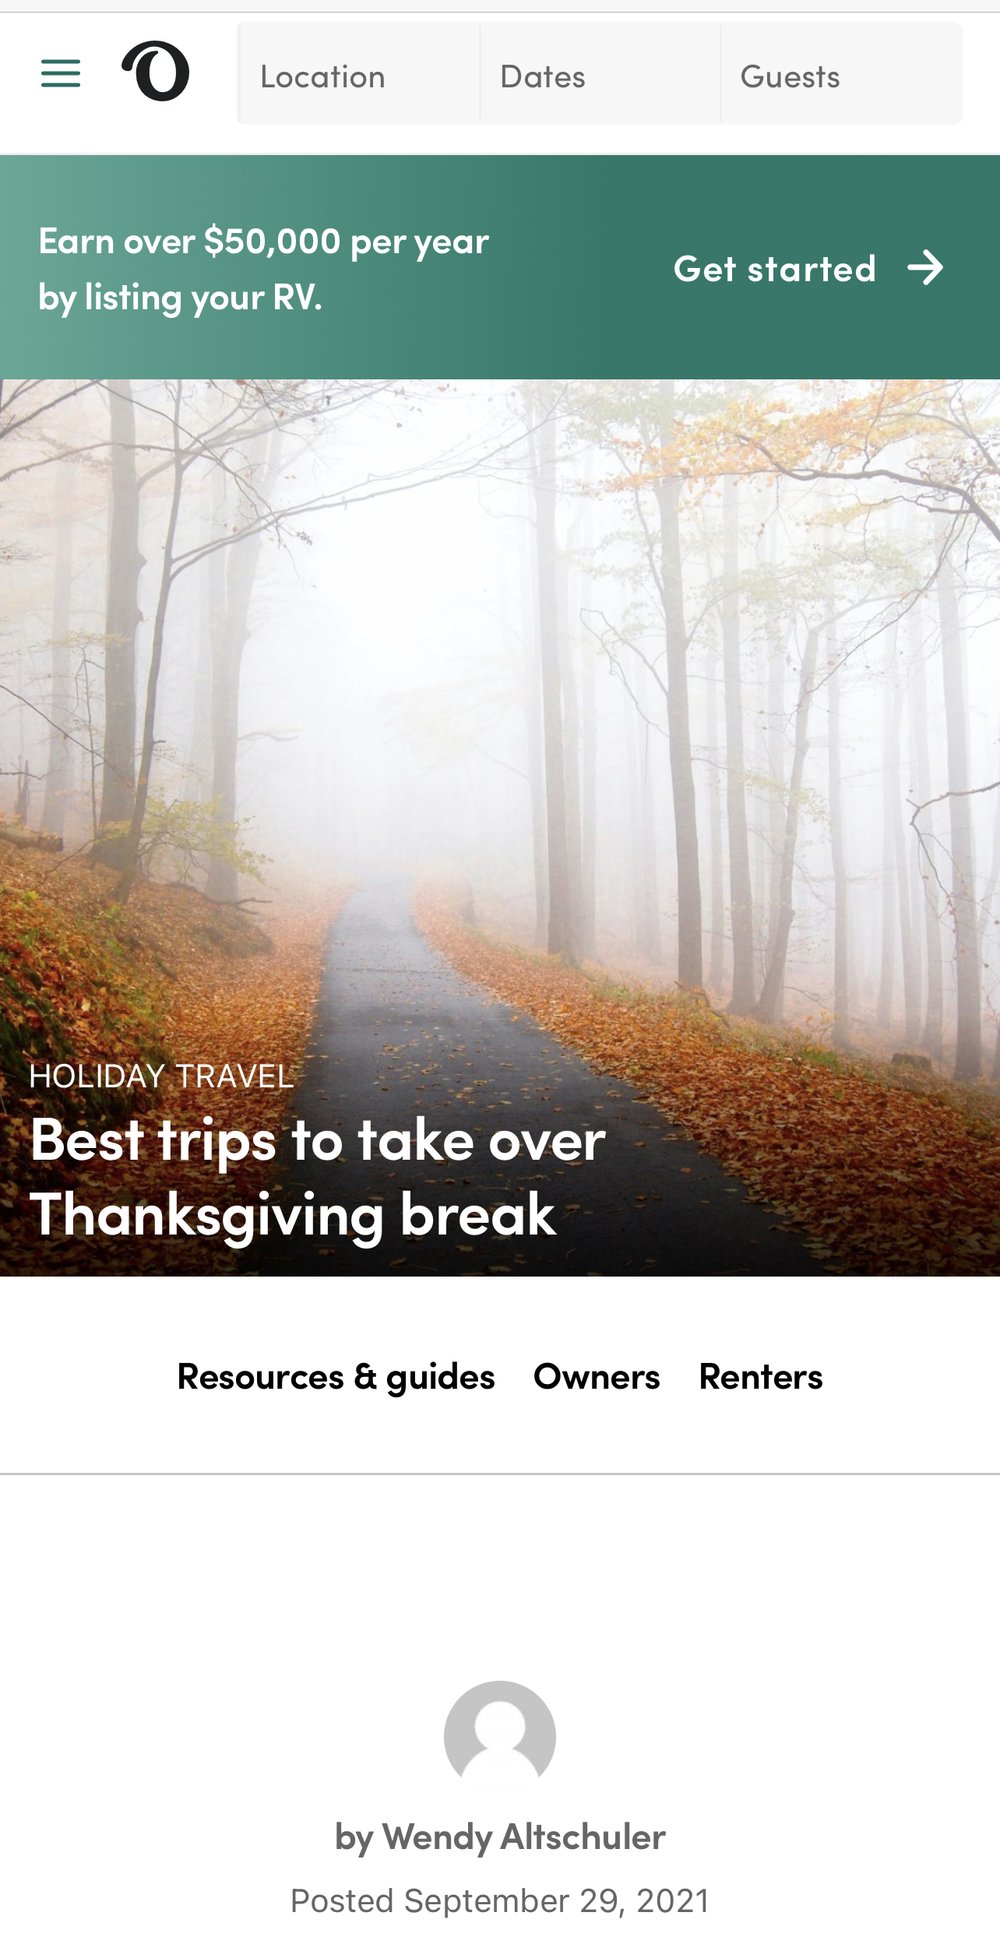 Best trips to take over Thanksgiving break